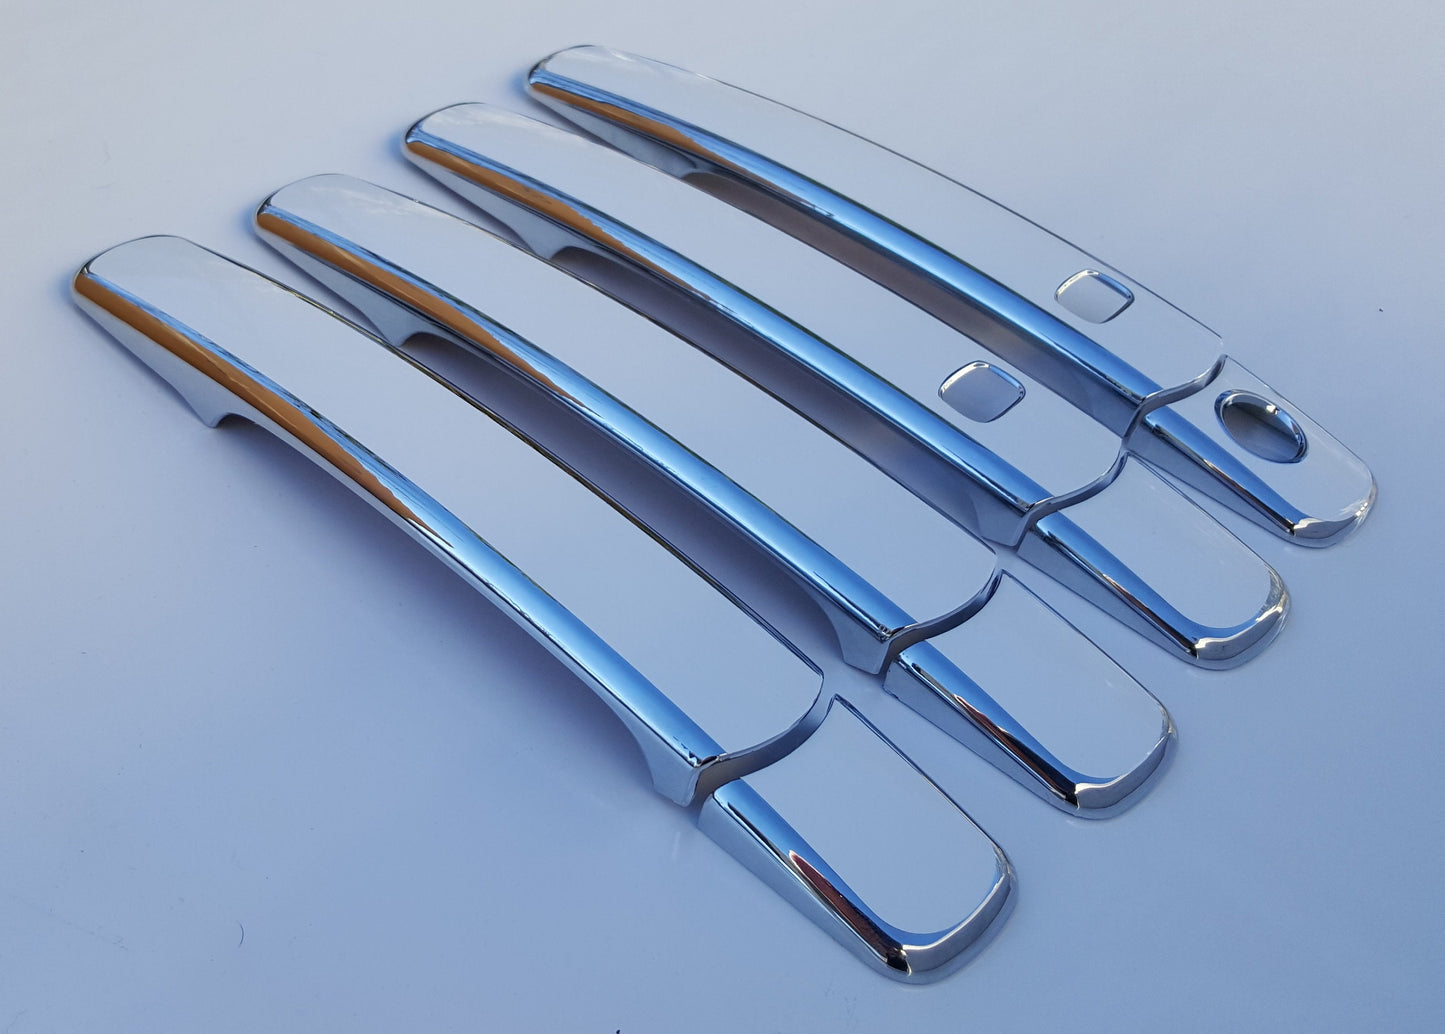 Full Set of Custom Chrome Door Handle Overlays / Covers For the 2003 - 2008 Infiniti X35 You Choose the Color of the Middle Insert